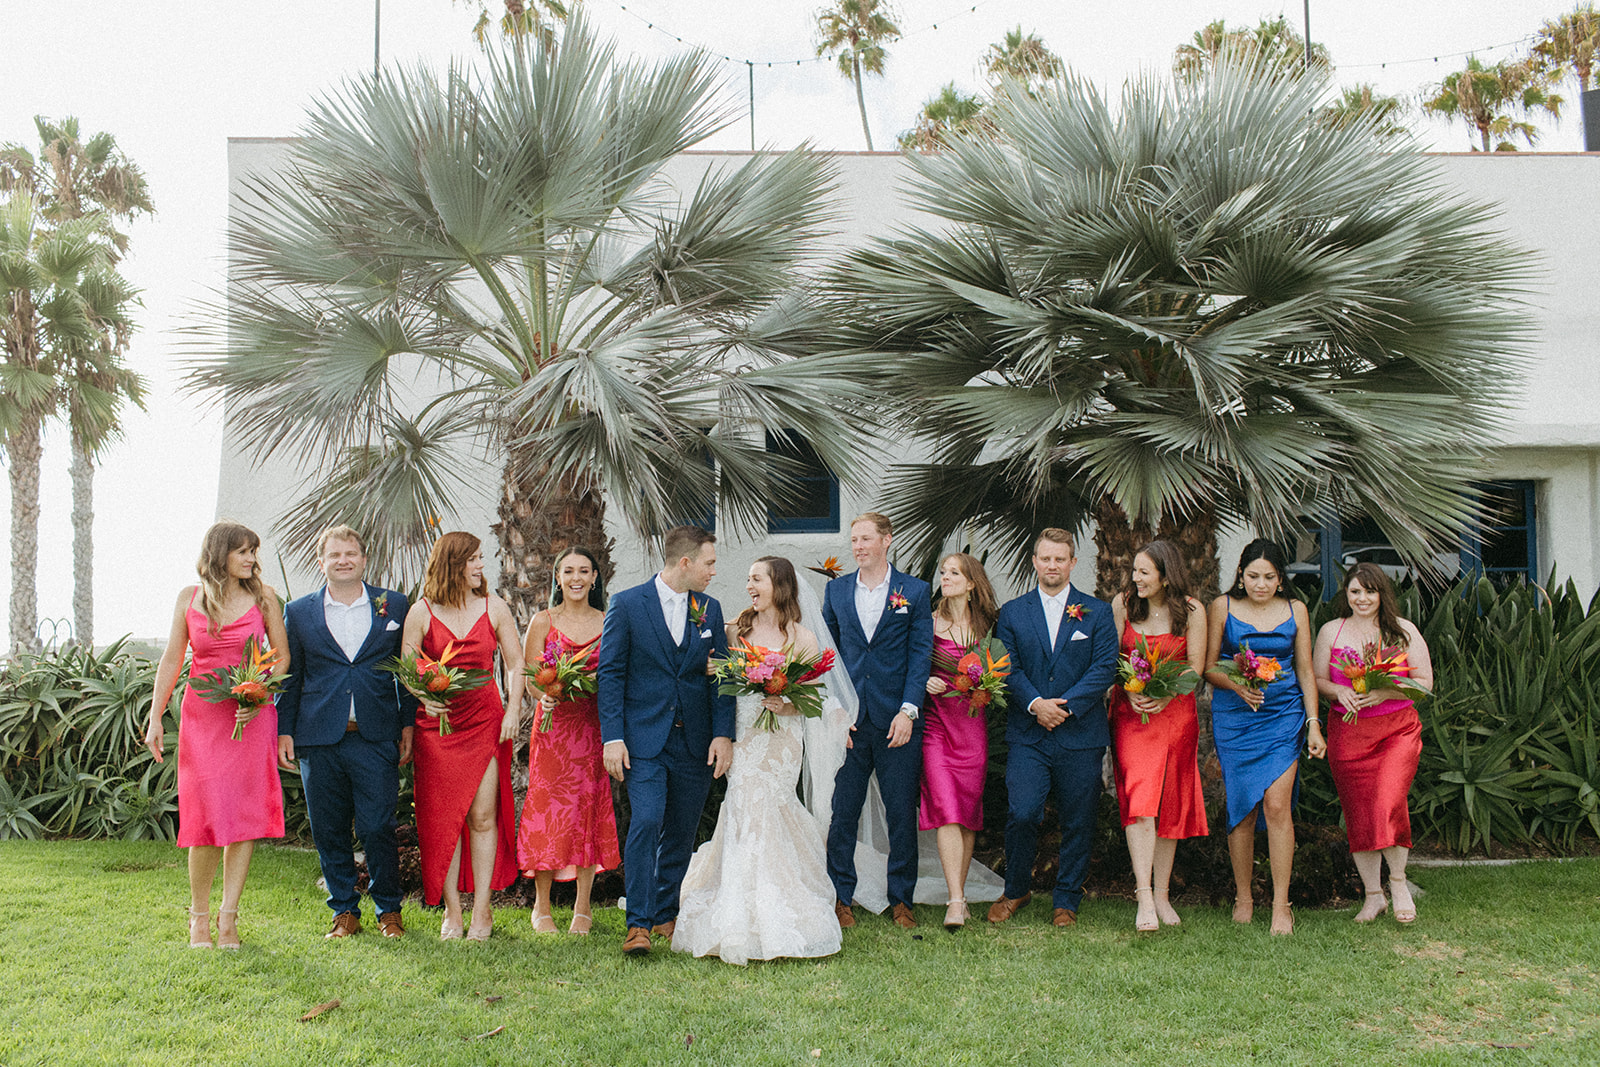 bride in strapless champagne with lace overlay mermaid wedding dress and tropical bouquet and groom in blue suit with white tie with wedding party in bright pink dresses and blue suits